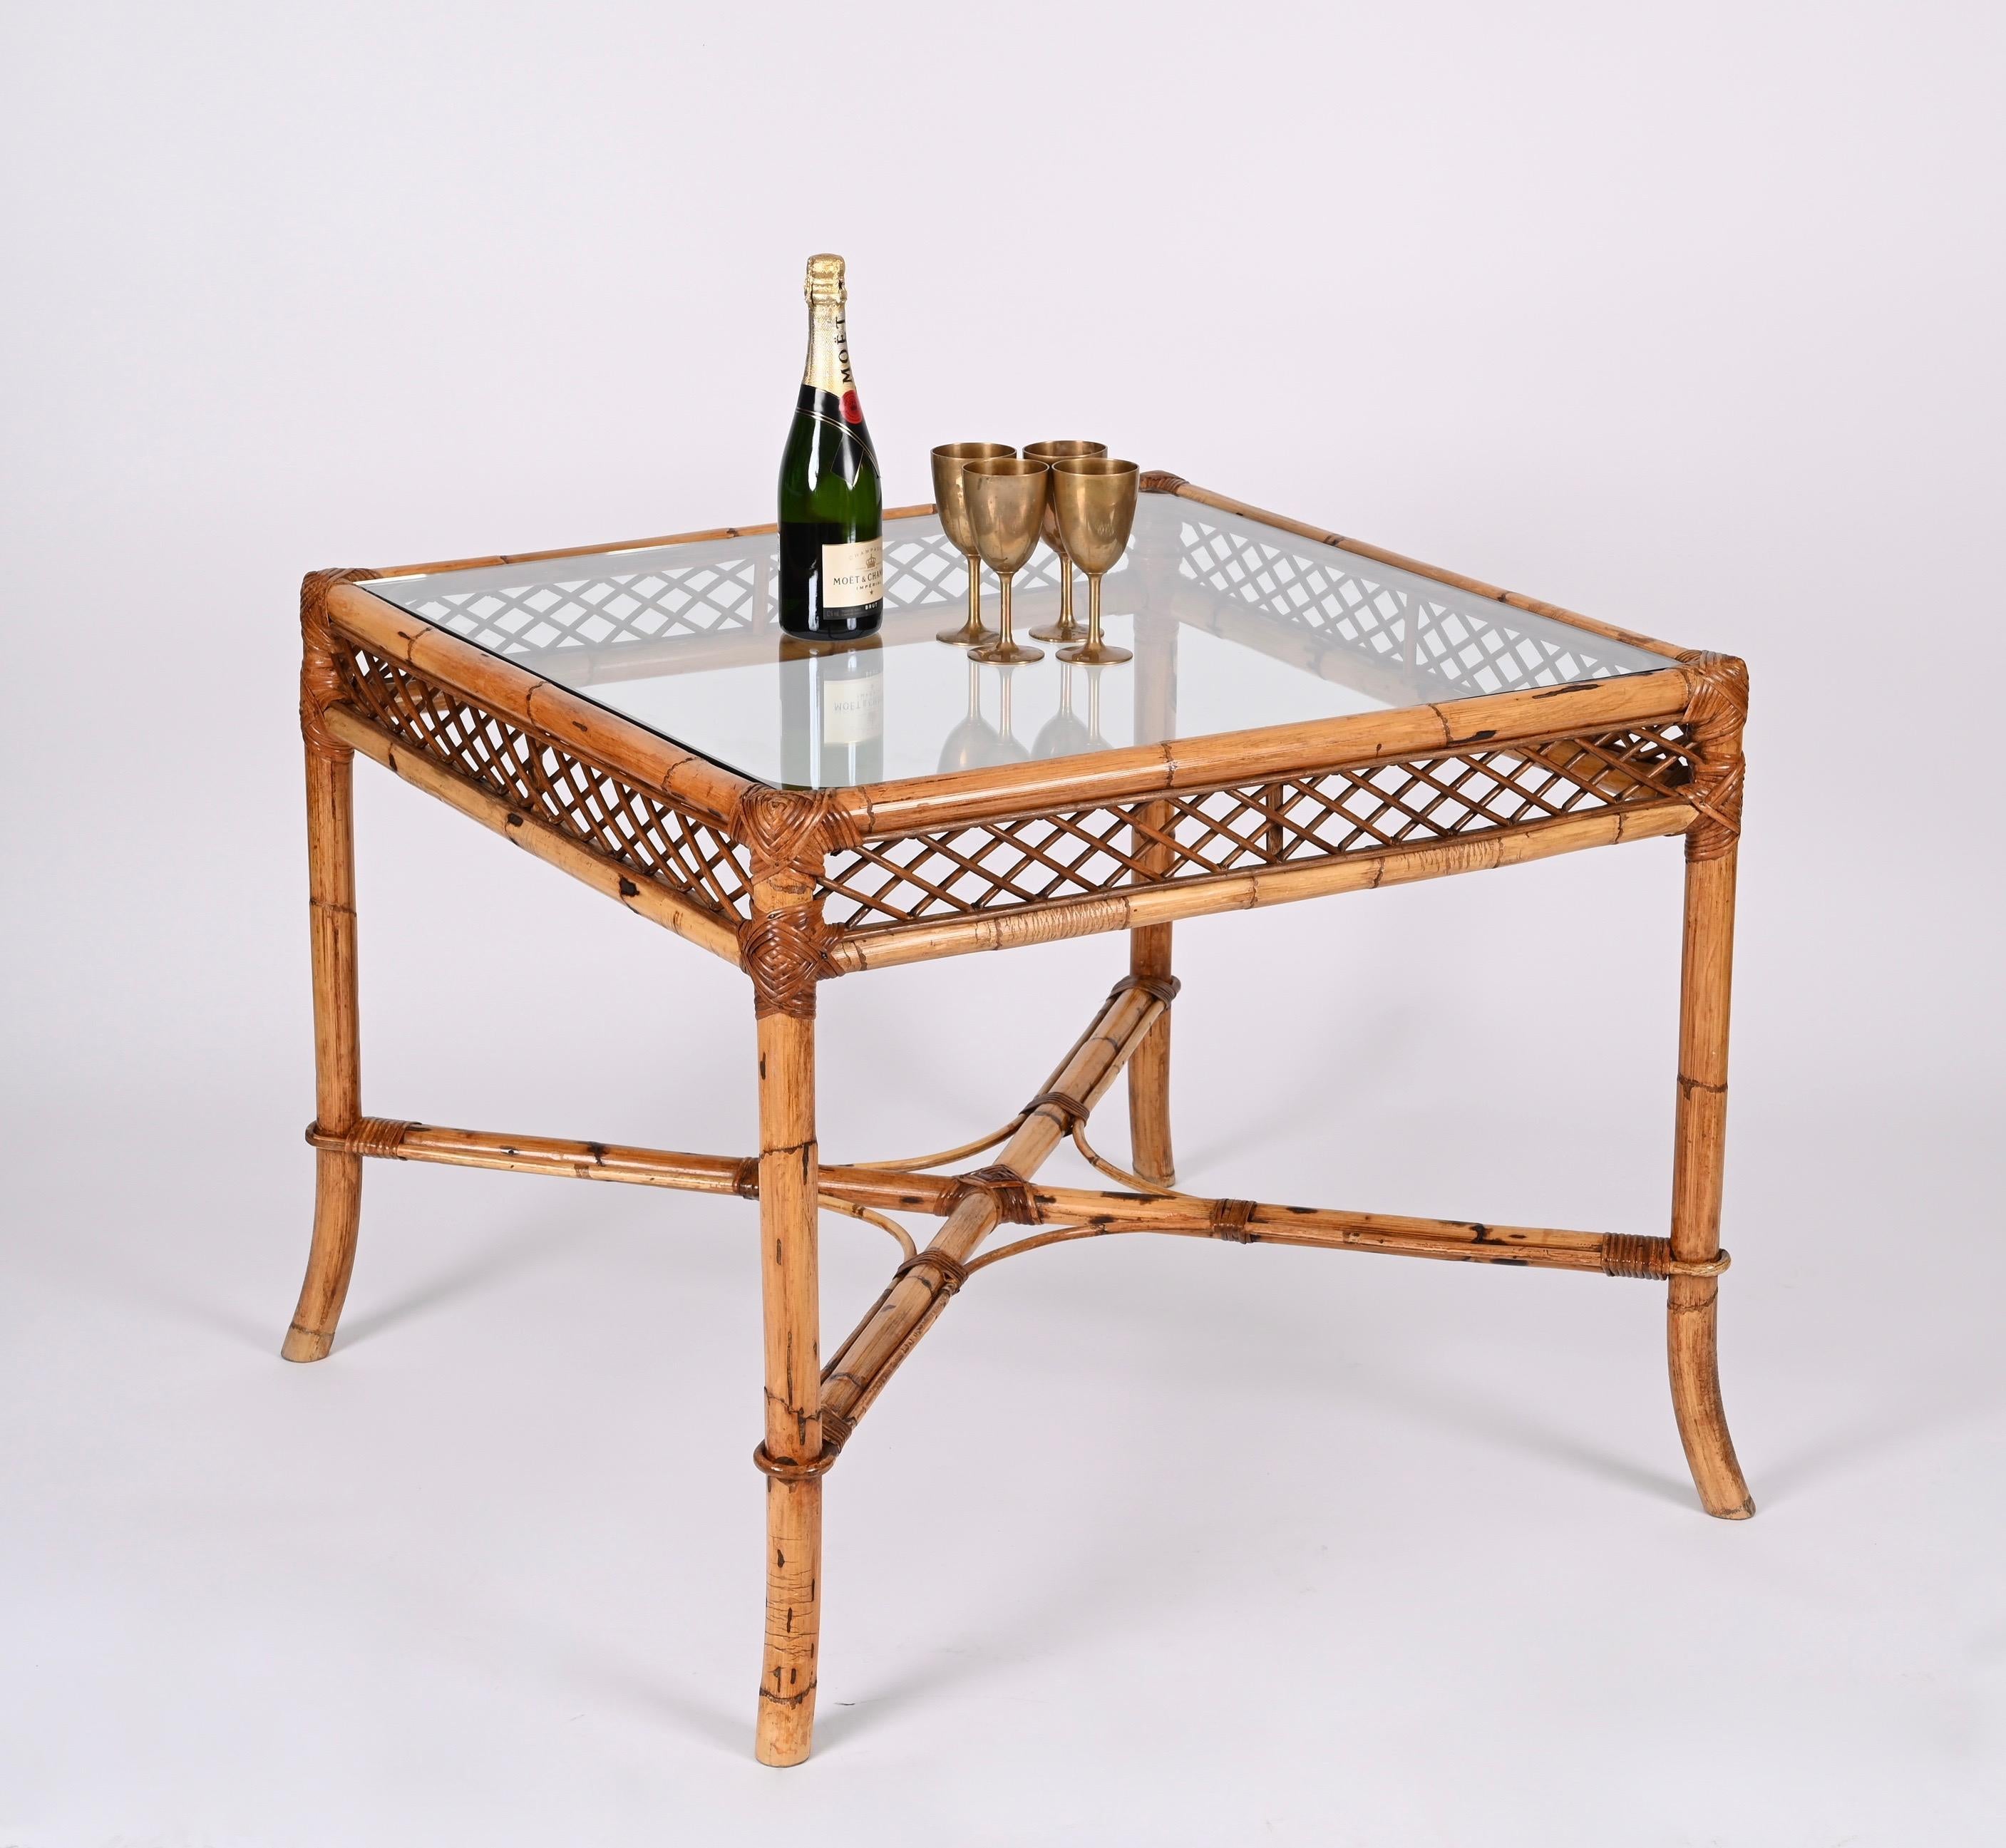 Midcentury Vivai del Sud Squared Bamboo Italian Dining Table with Glass Top 1960 For Sale 10